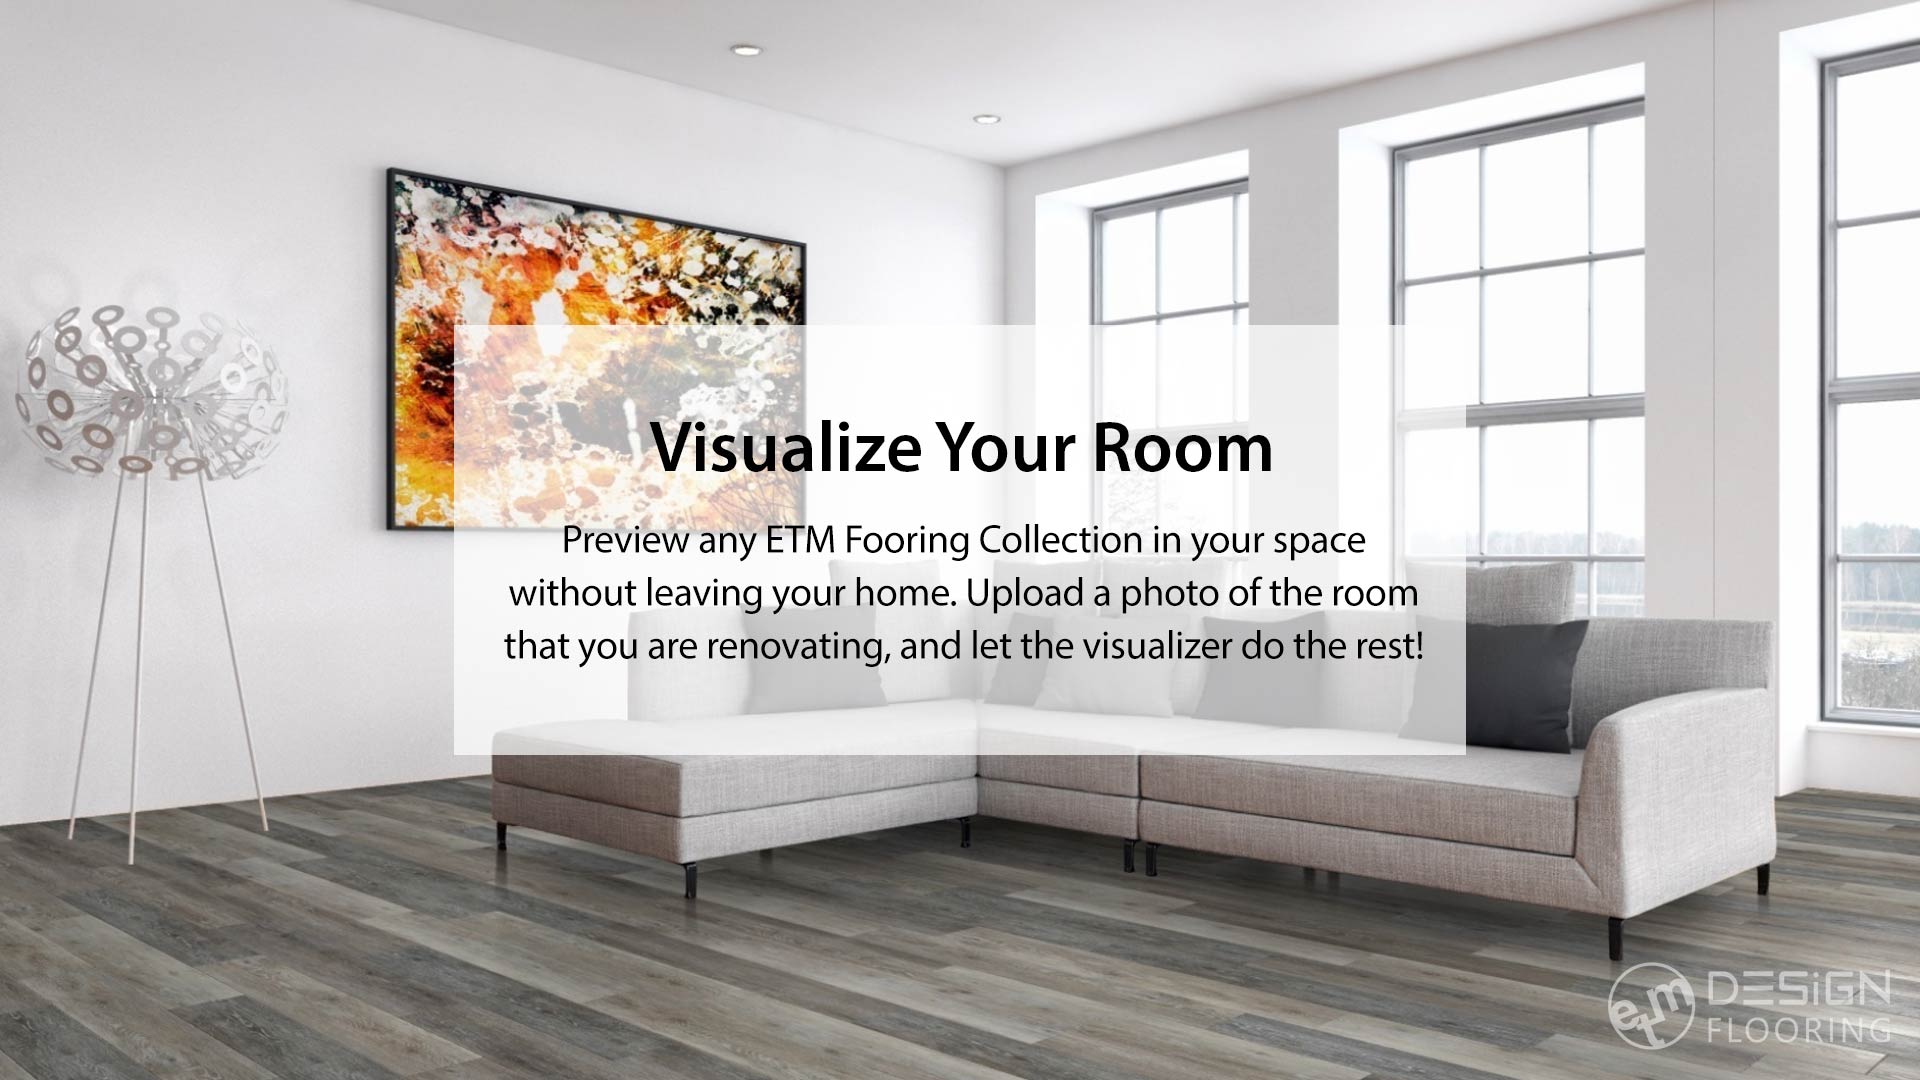 Visualize Your Room From Home